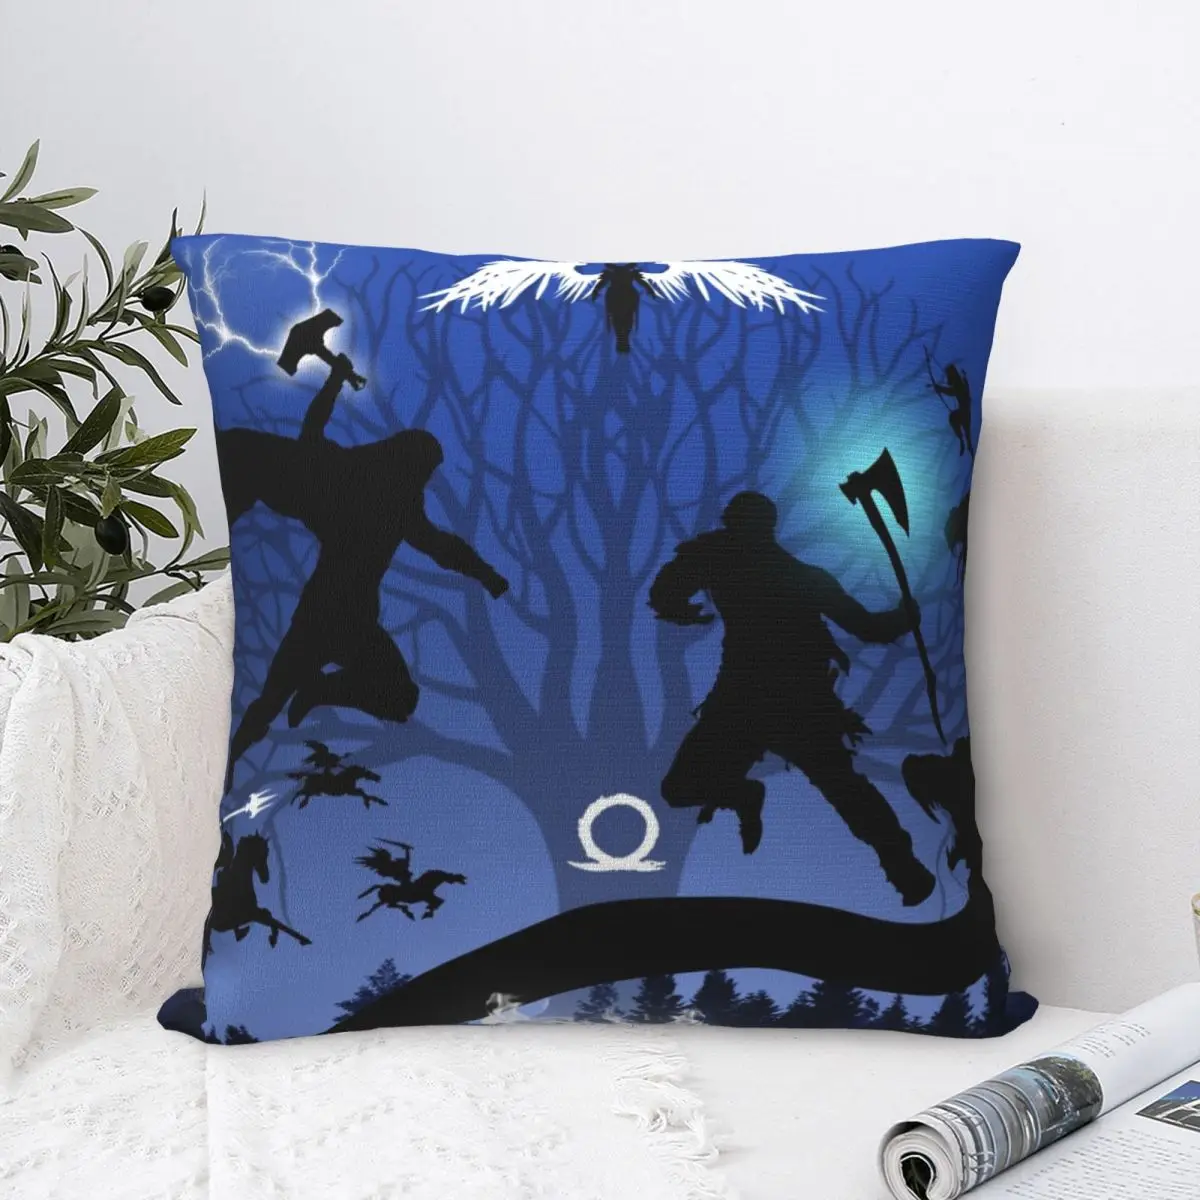 

God Of War Ragnarok Poster Square Pillowcase Cushion Cover Decorative Pillow Case Polyester Throw Pillow cover For Home Bedroom